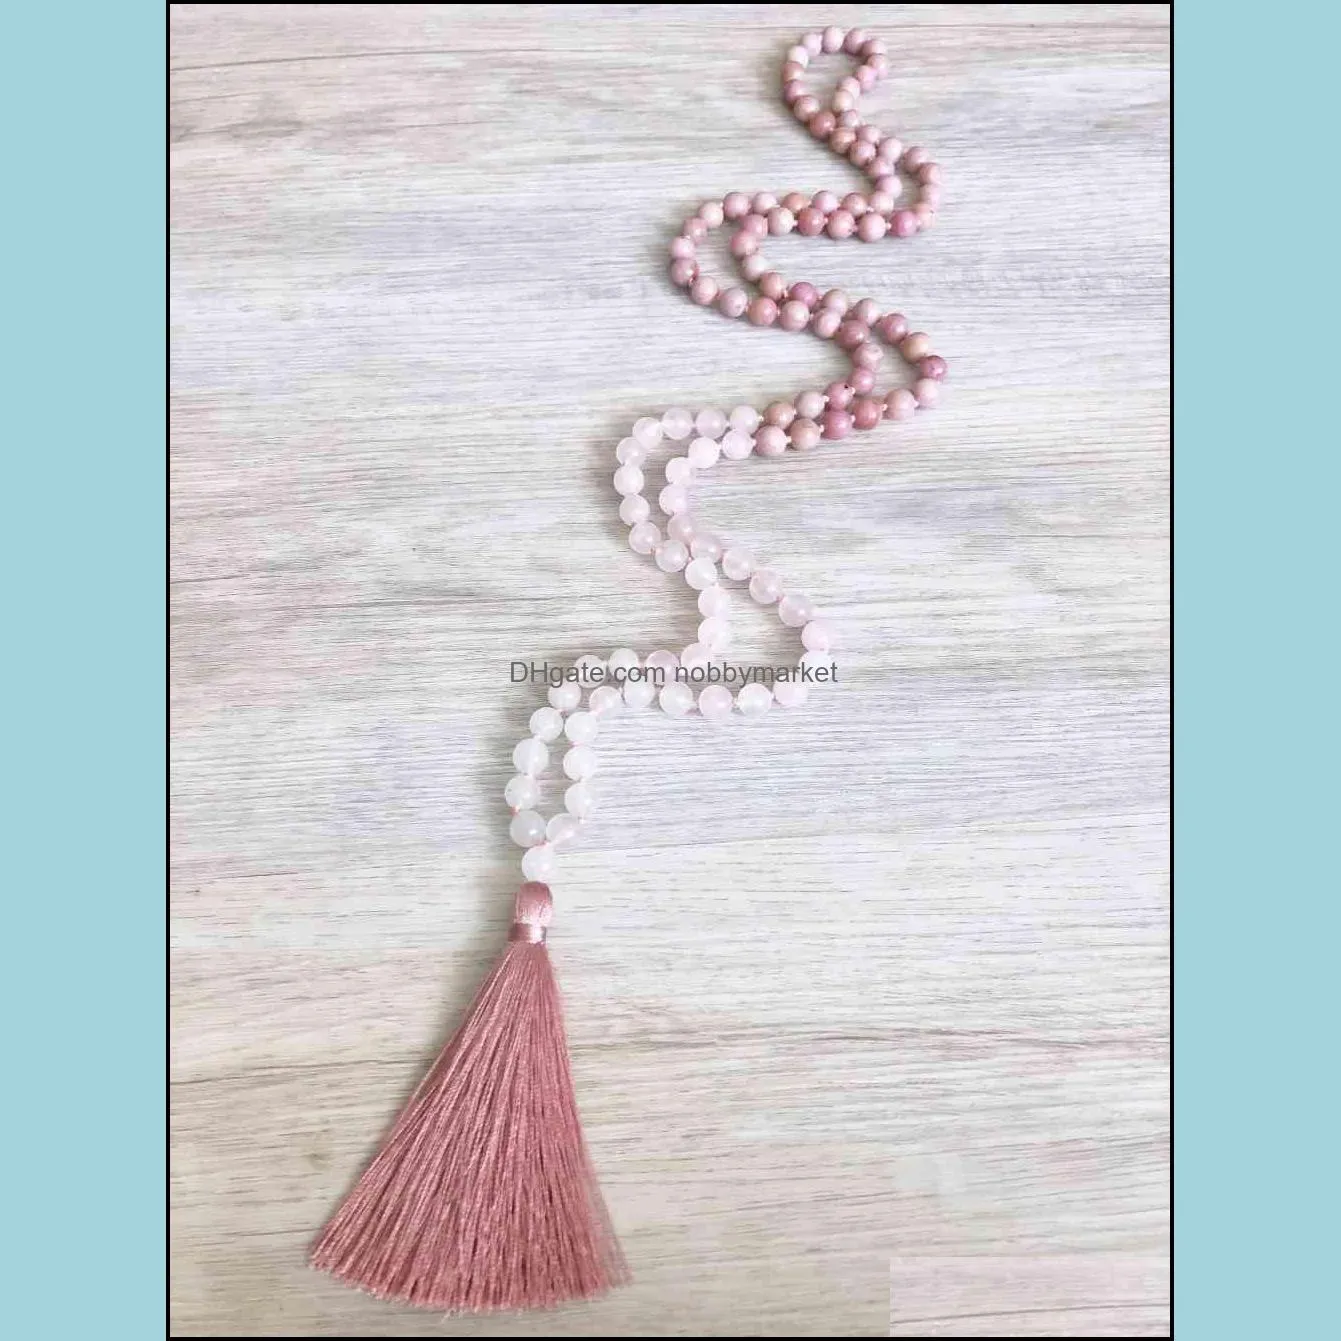 Rhodonite & RoseQuartz Necklace 108 Mala Beads Necklace Hand Knotted Necklaces Taeesl Necklaces Prayer Meditation Beads 210323